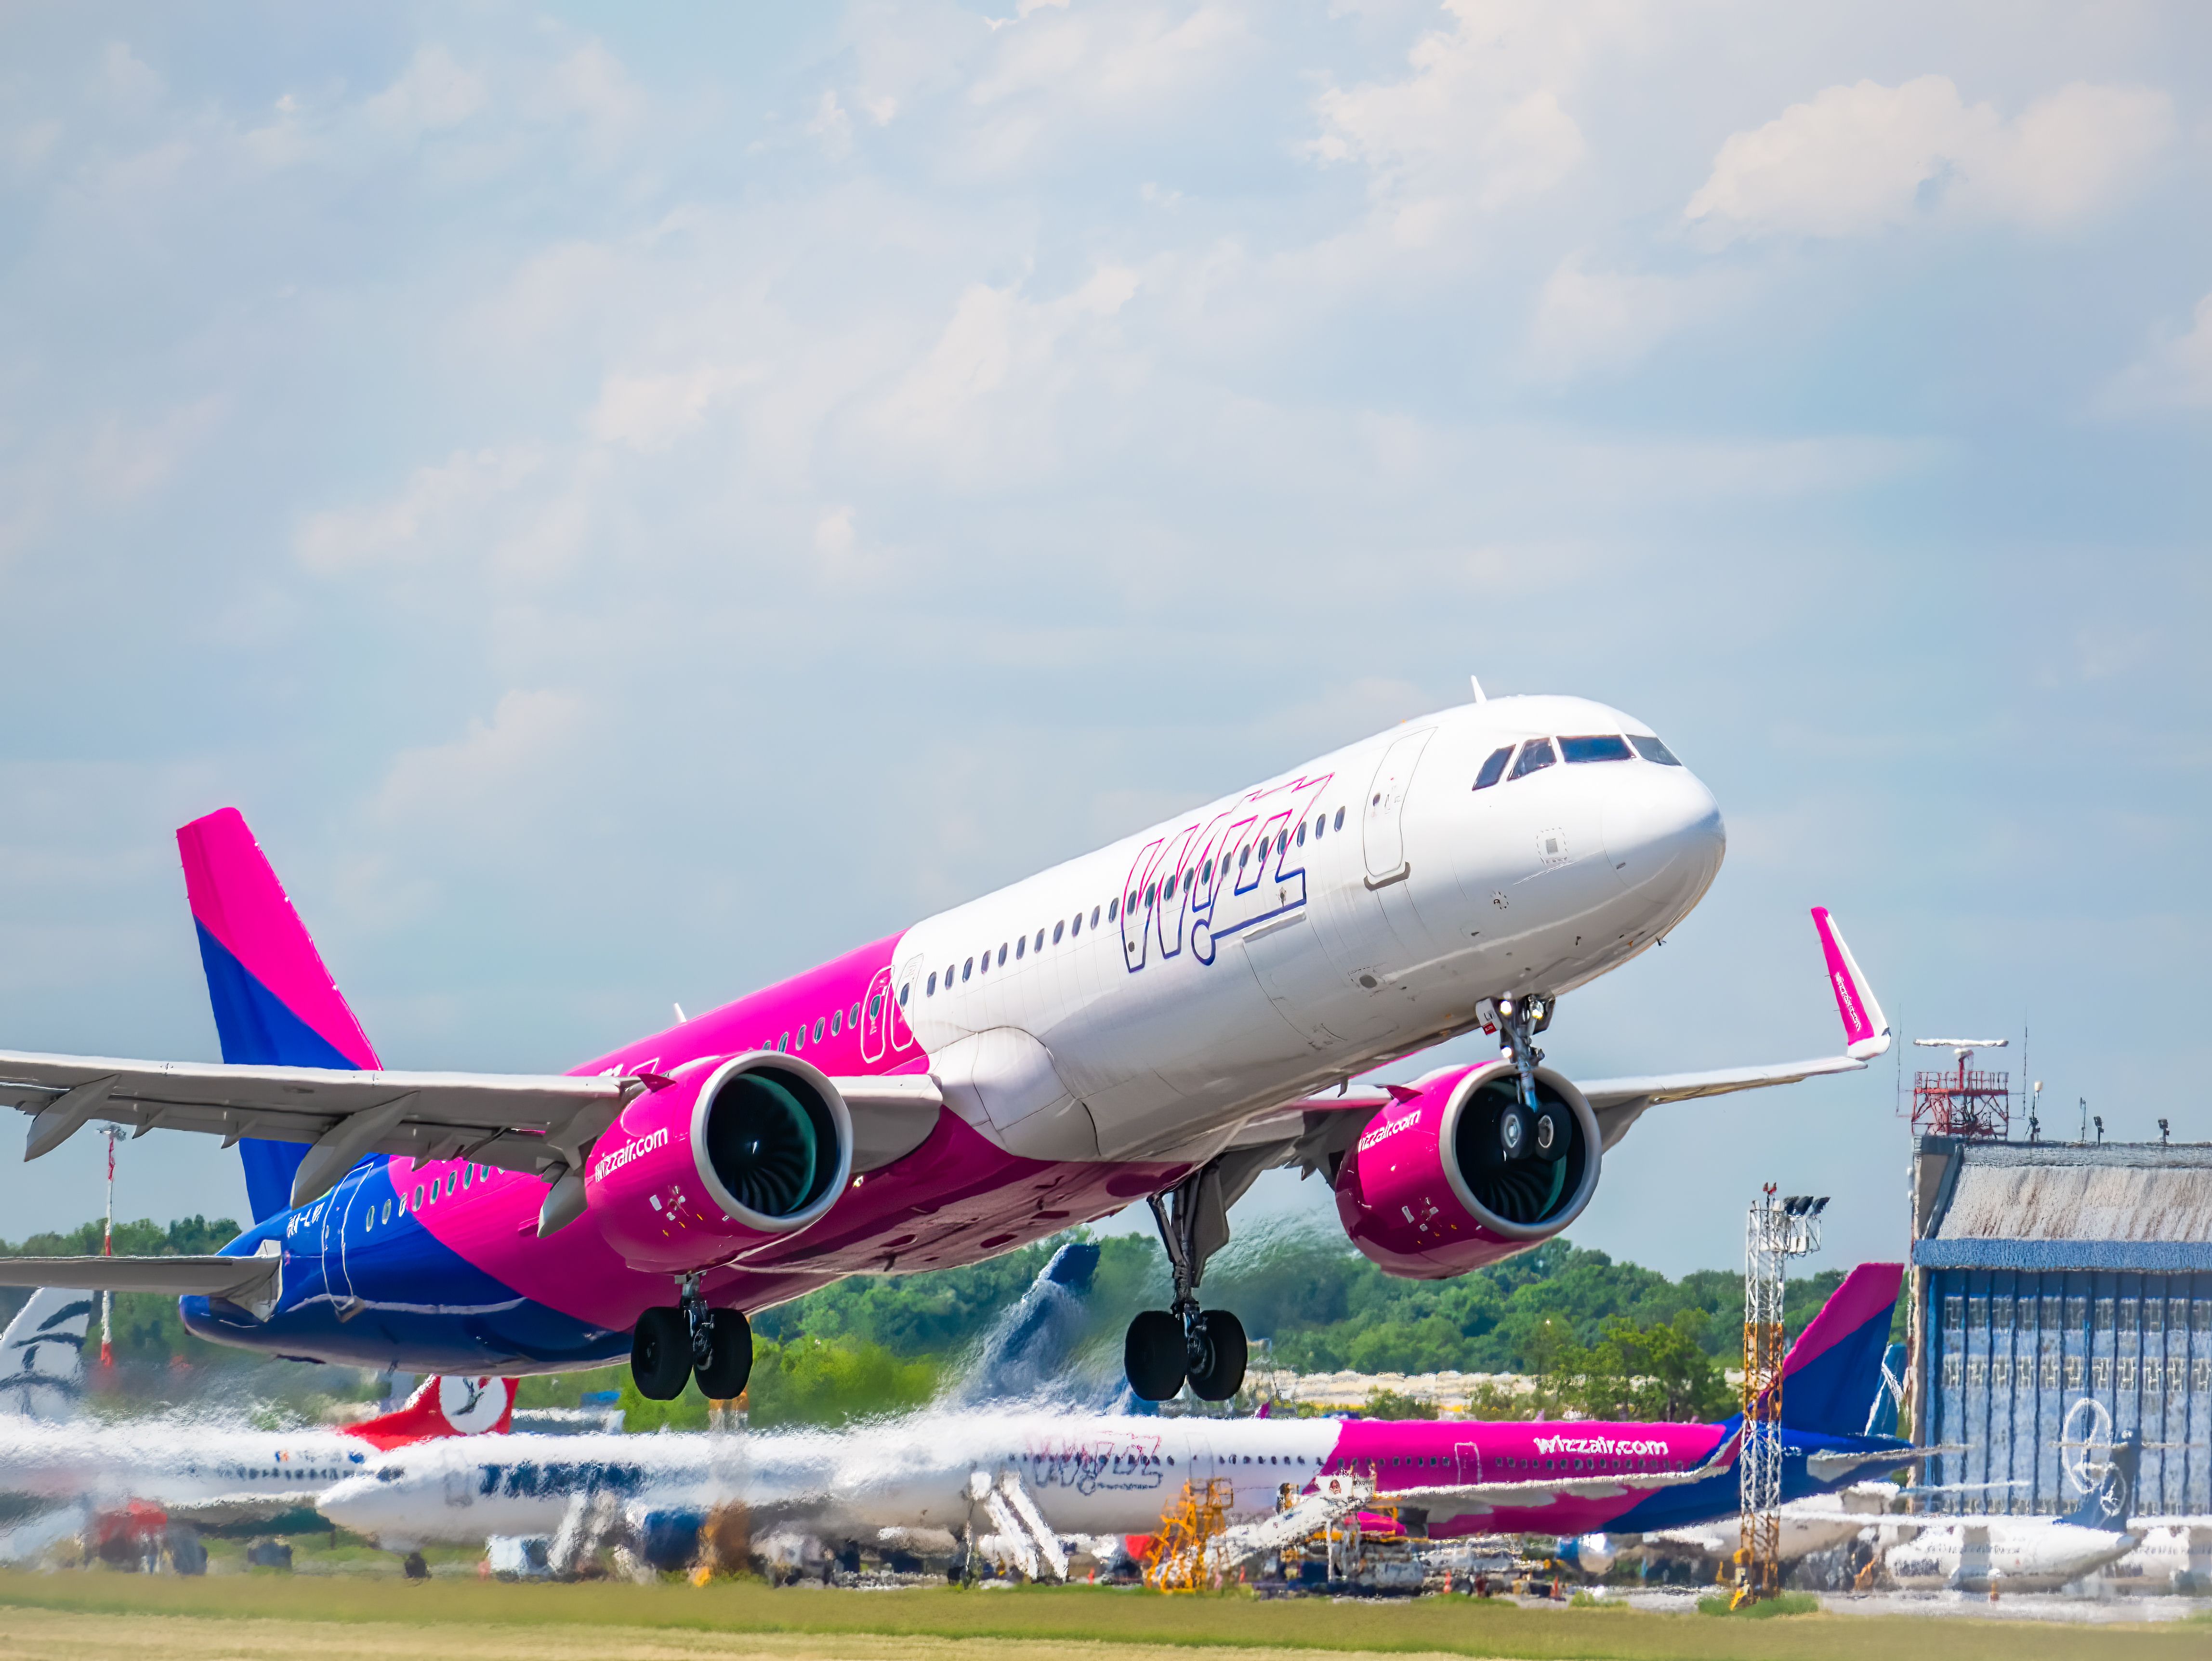 A Wizz Air A320 taking off.